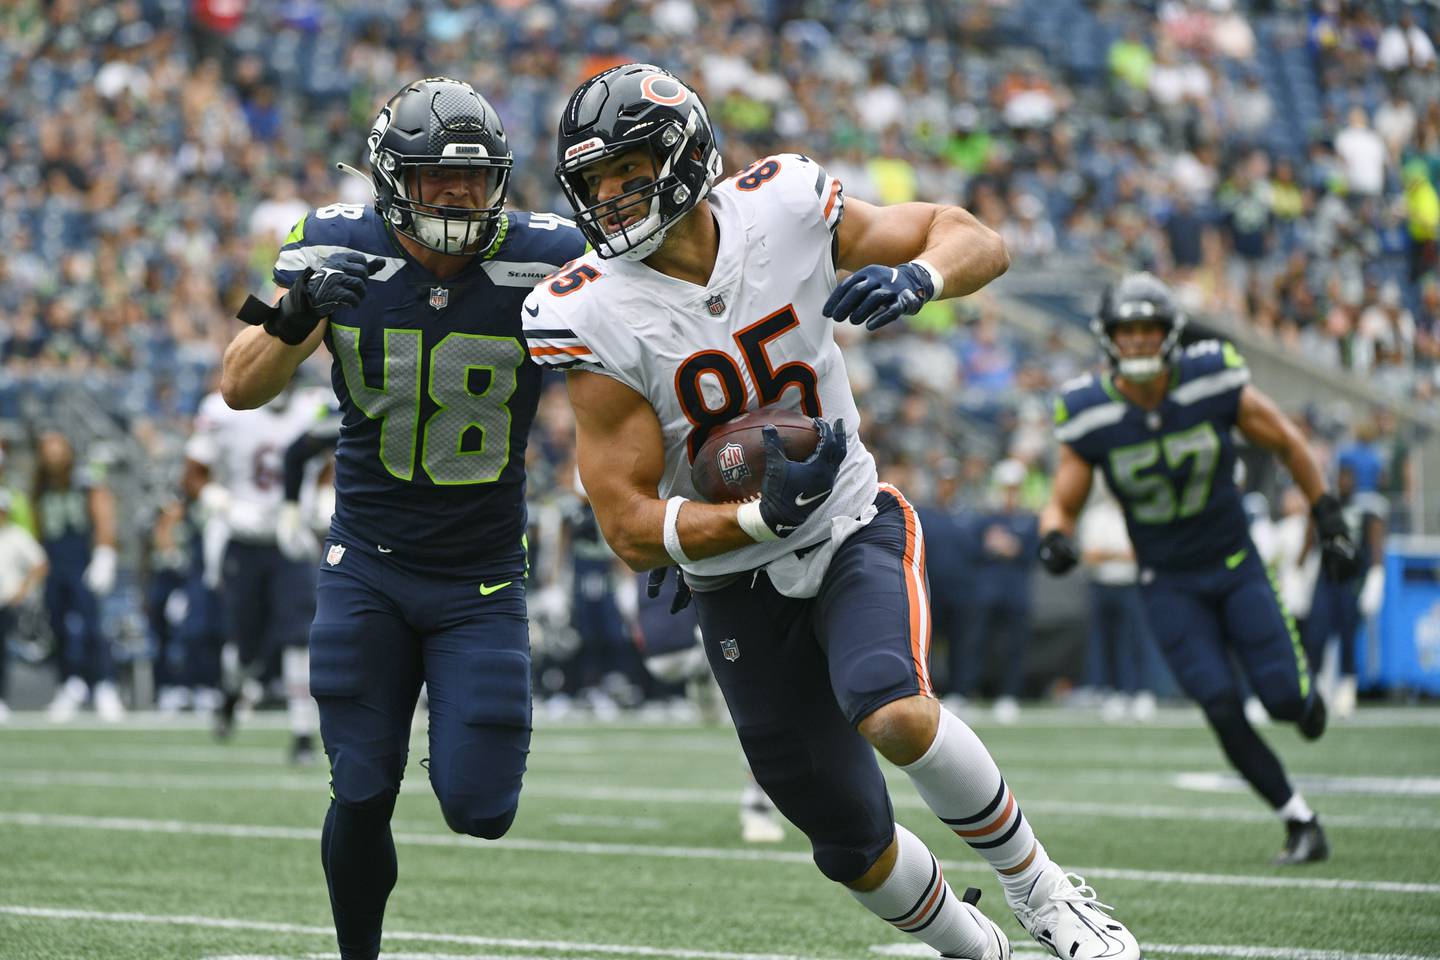 Chicago Bears tight end Cole Kmet tries to avoid a tackle by Seattle Seahawks linebacker Joel Dublanko during the first half Thursday, Aug. 18, 2022, in Seattle.